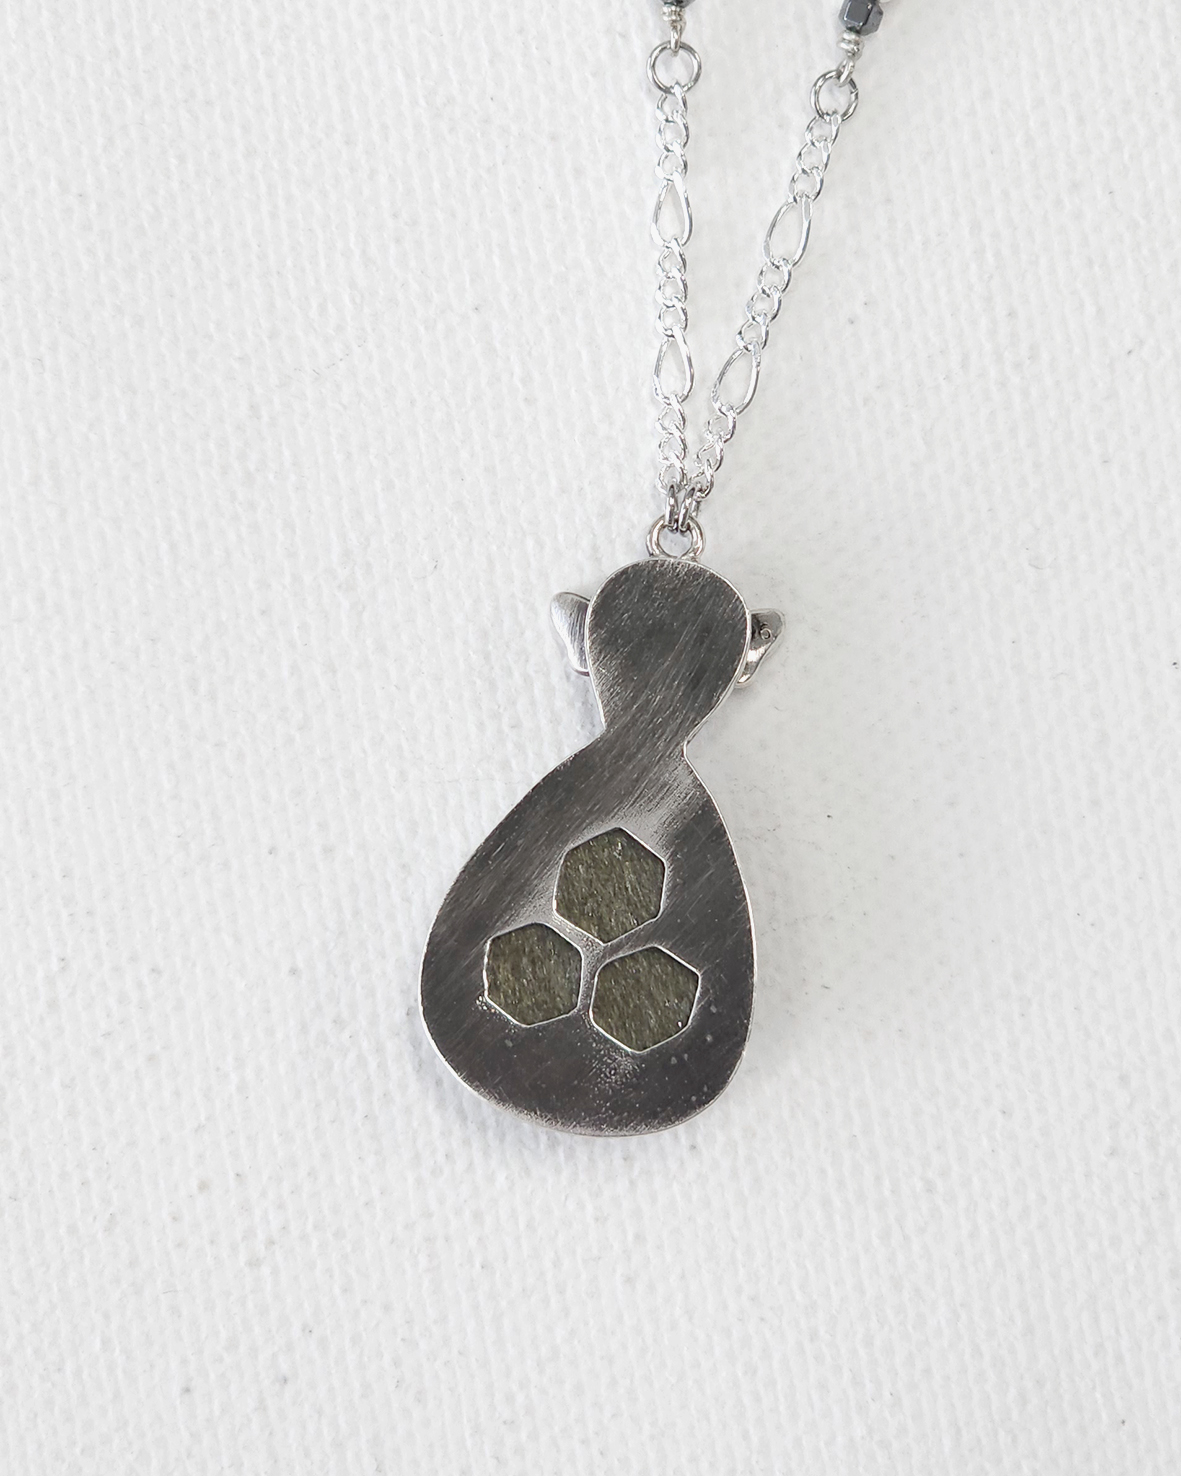 beehive necklace with gold sheen obsidian gemstone on oxidized sterling silver